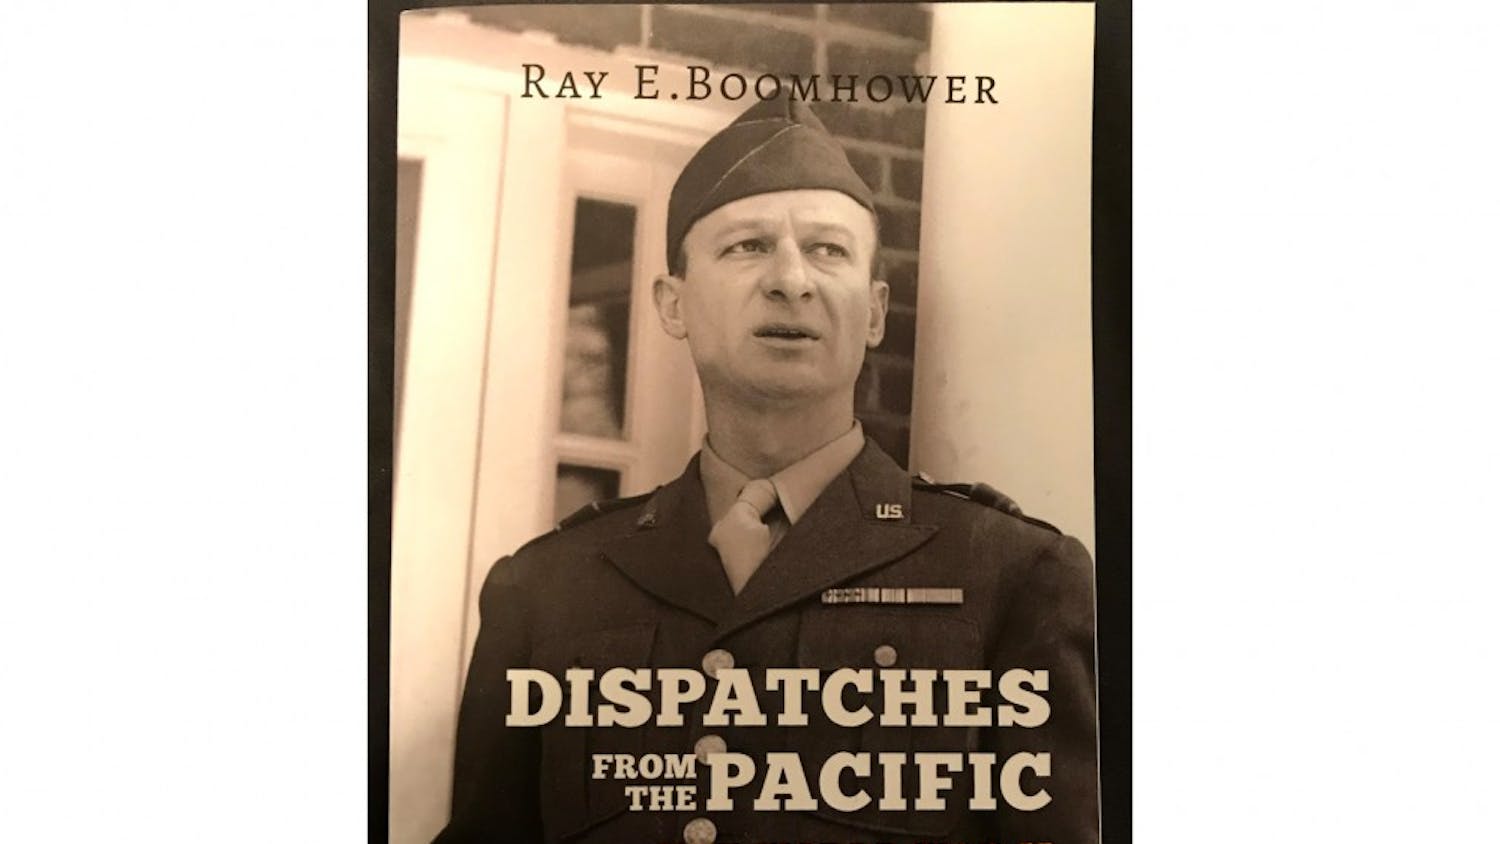 Ray Boomhower's book "Dispatches from the Pacific" tells about the experiences of WWII reporter Robert L. Sherrod. Sherrod was a war correspondent for Time and Life magazines, during which time he covered WWII and the Vietnam War.&nbsp;